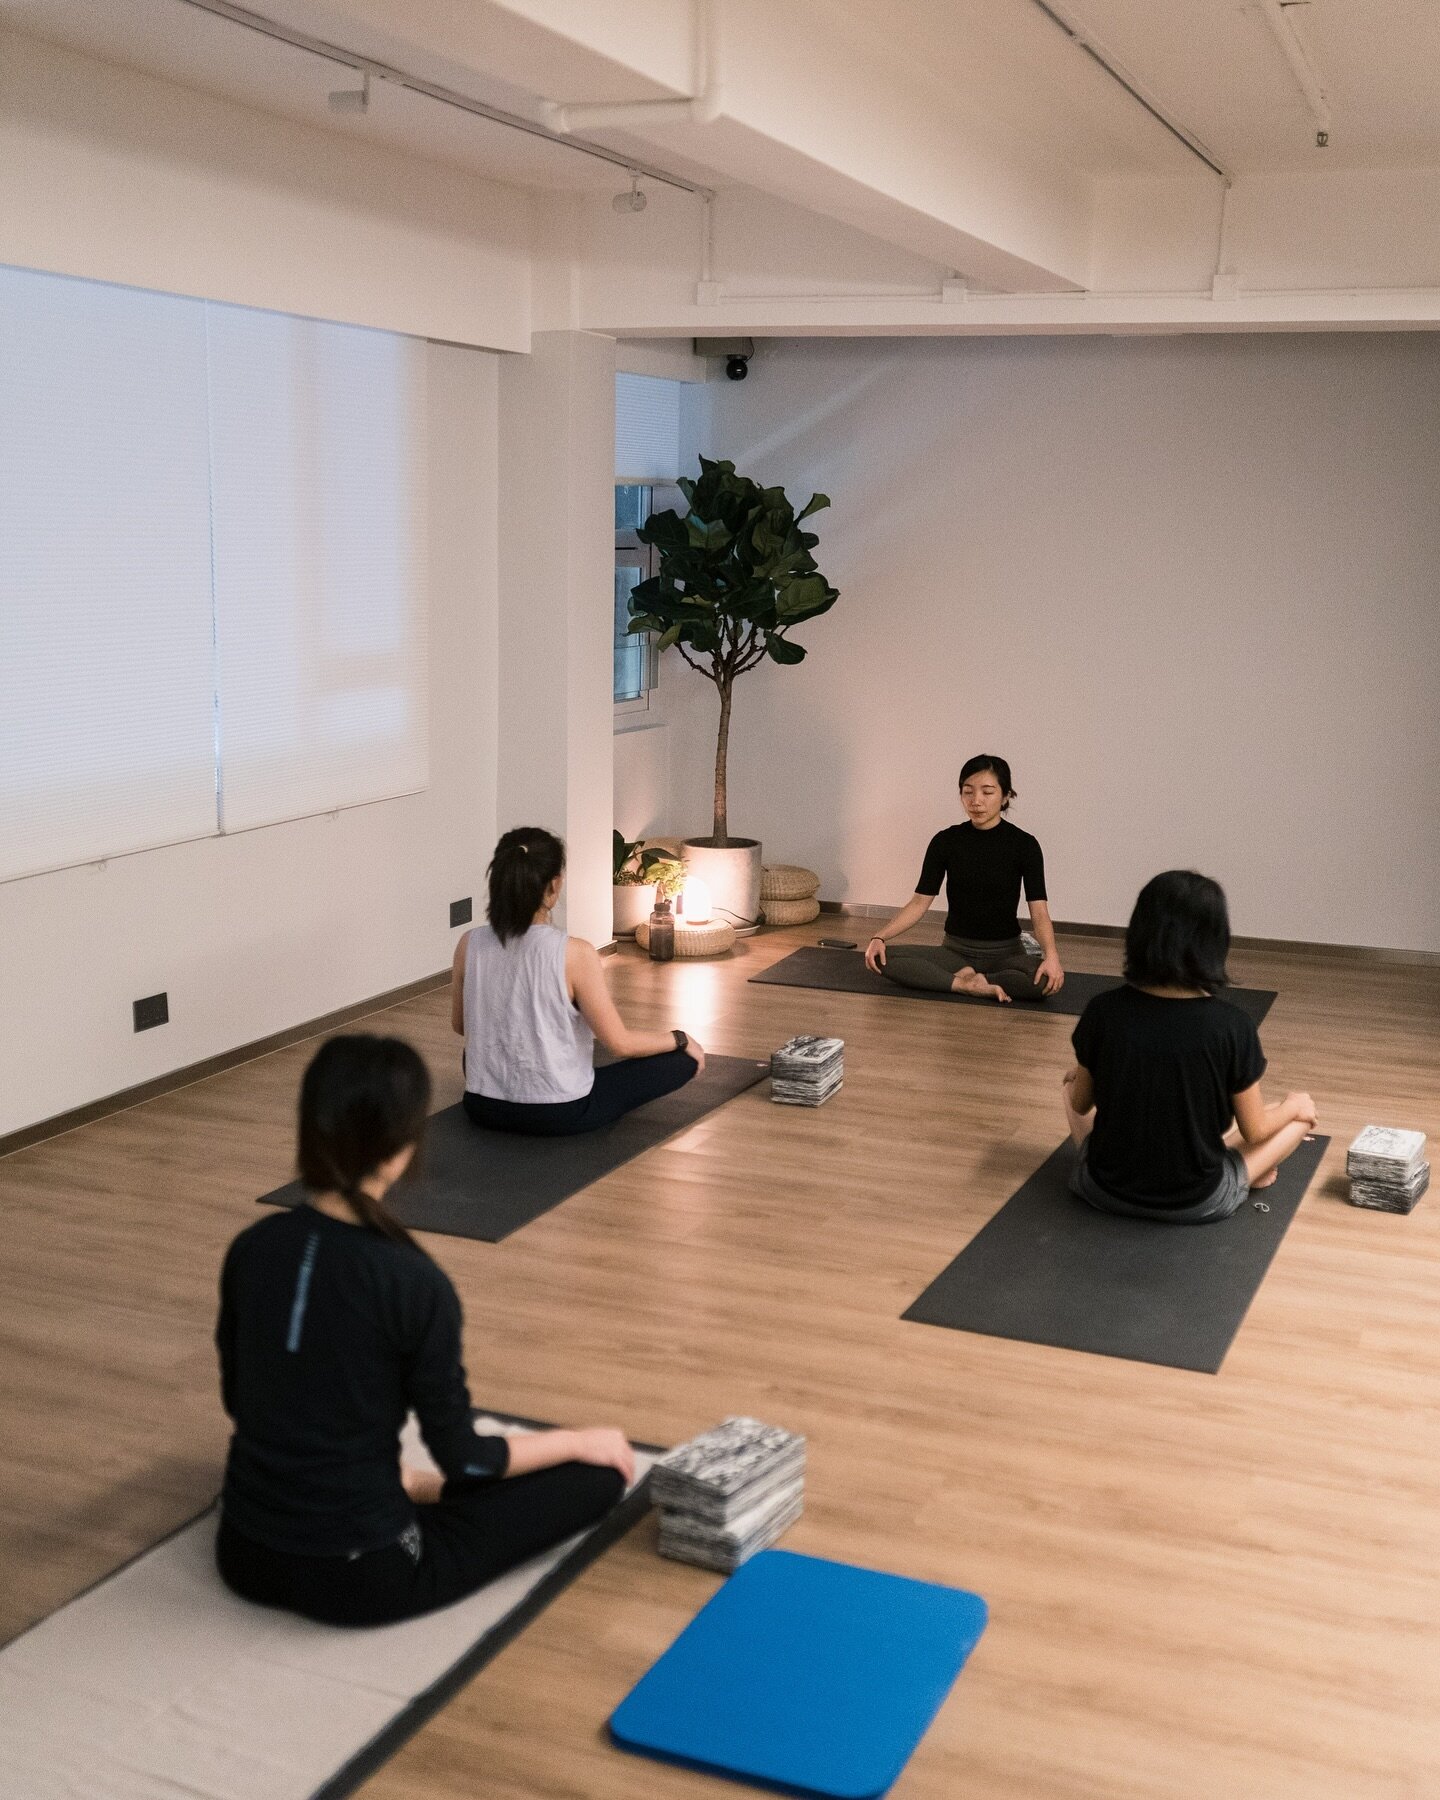 &ldquo;I meditate so that I can inundate my entire being with the omnipotent power of peace.&rdquo;-Sri Chinmoy 

#YogaClass #YogaJourneyHK #ProfessionalYoga #hkyoga #hkyogastudio #yoga #hkyogateacher #yogainspiration